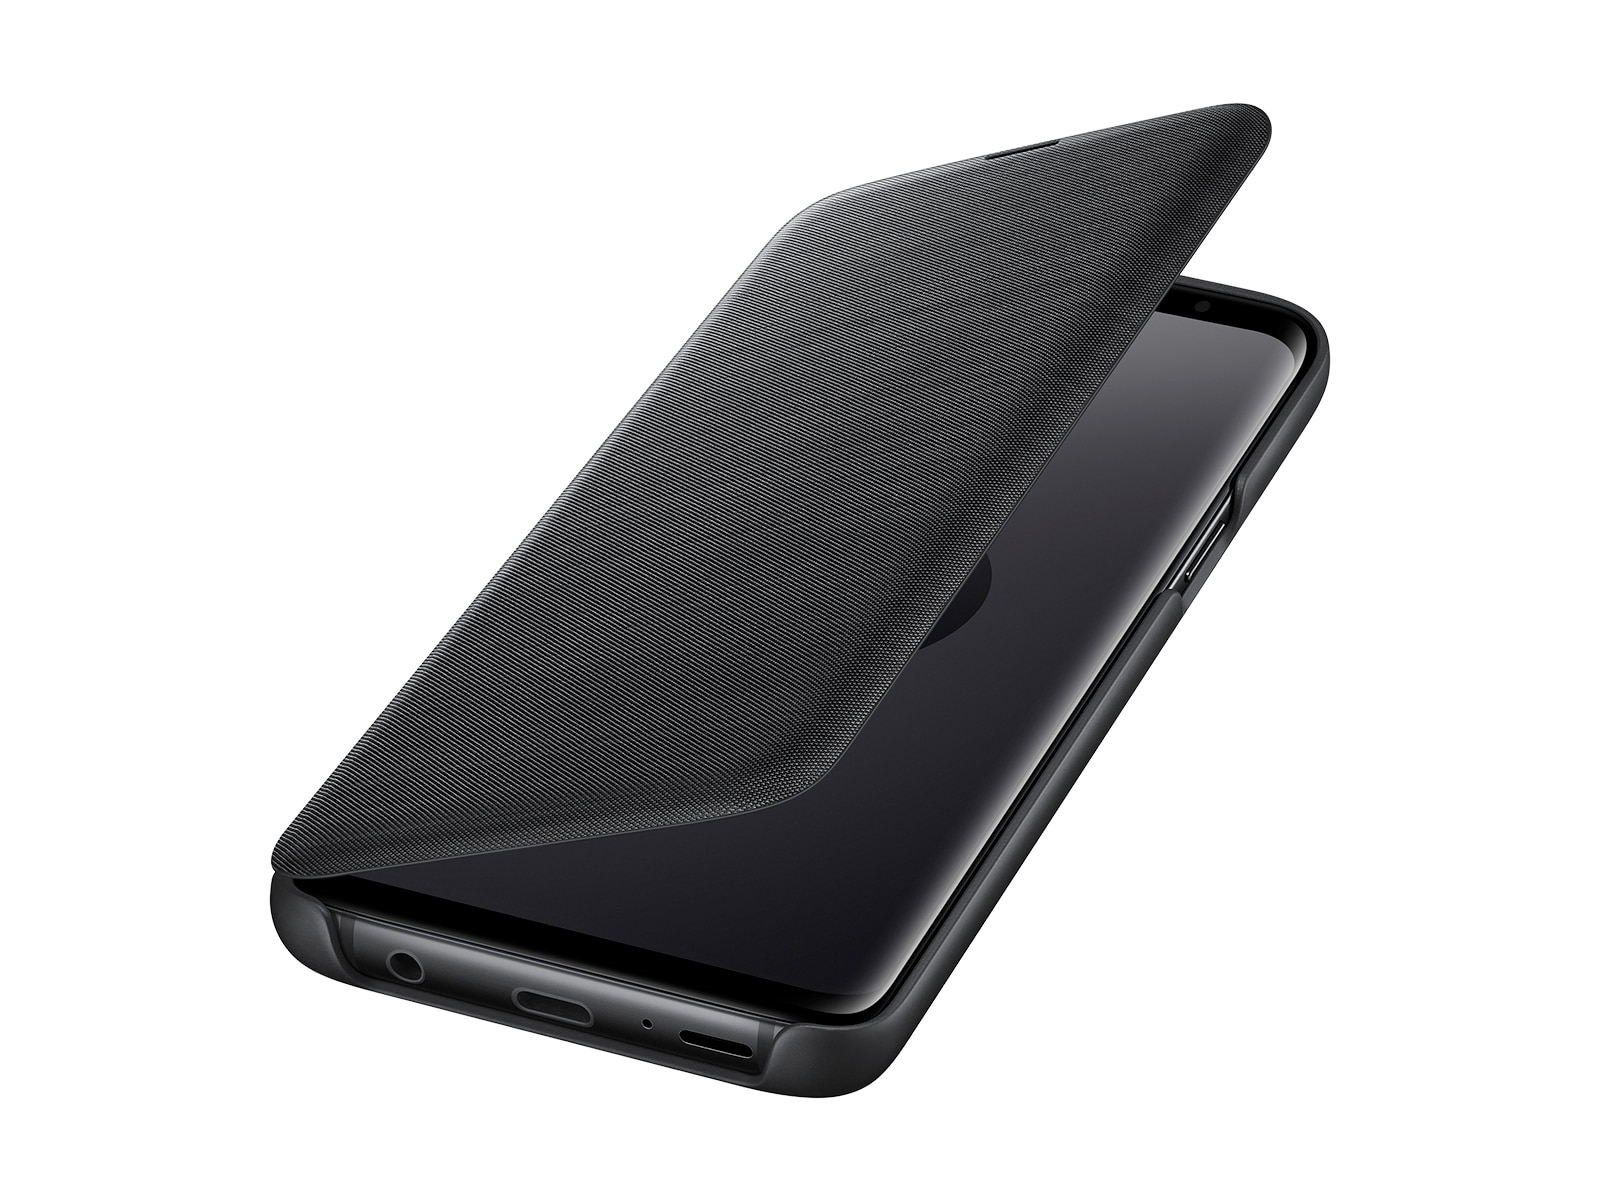 Thumbnail image of Galaxy S9+ LED Wallet Cover, Black